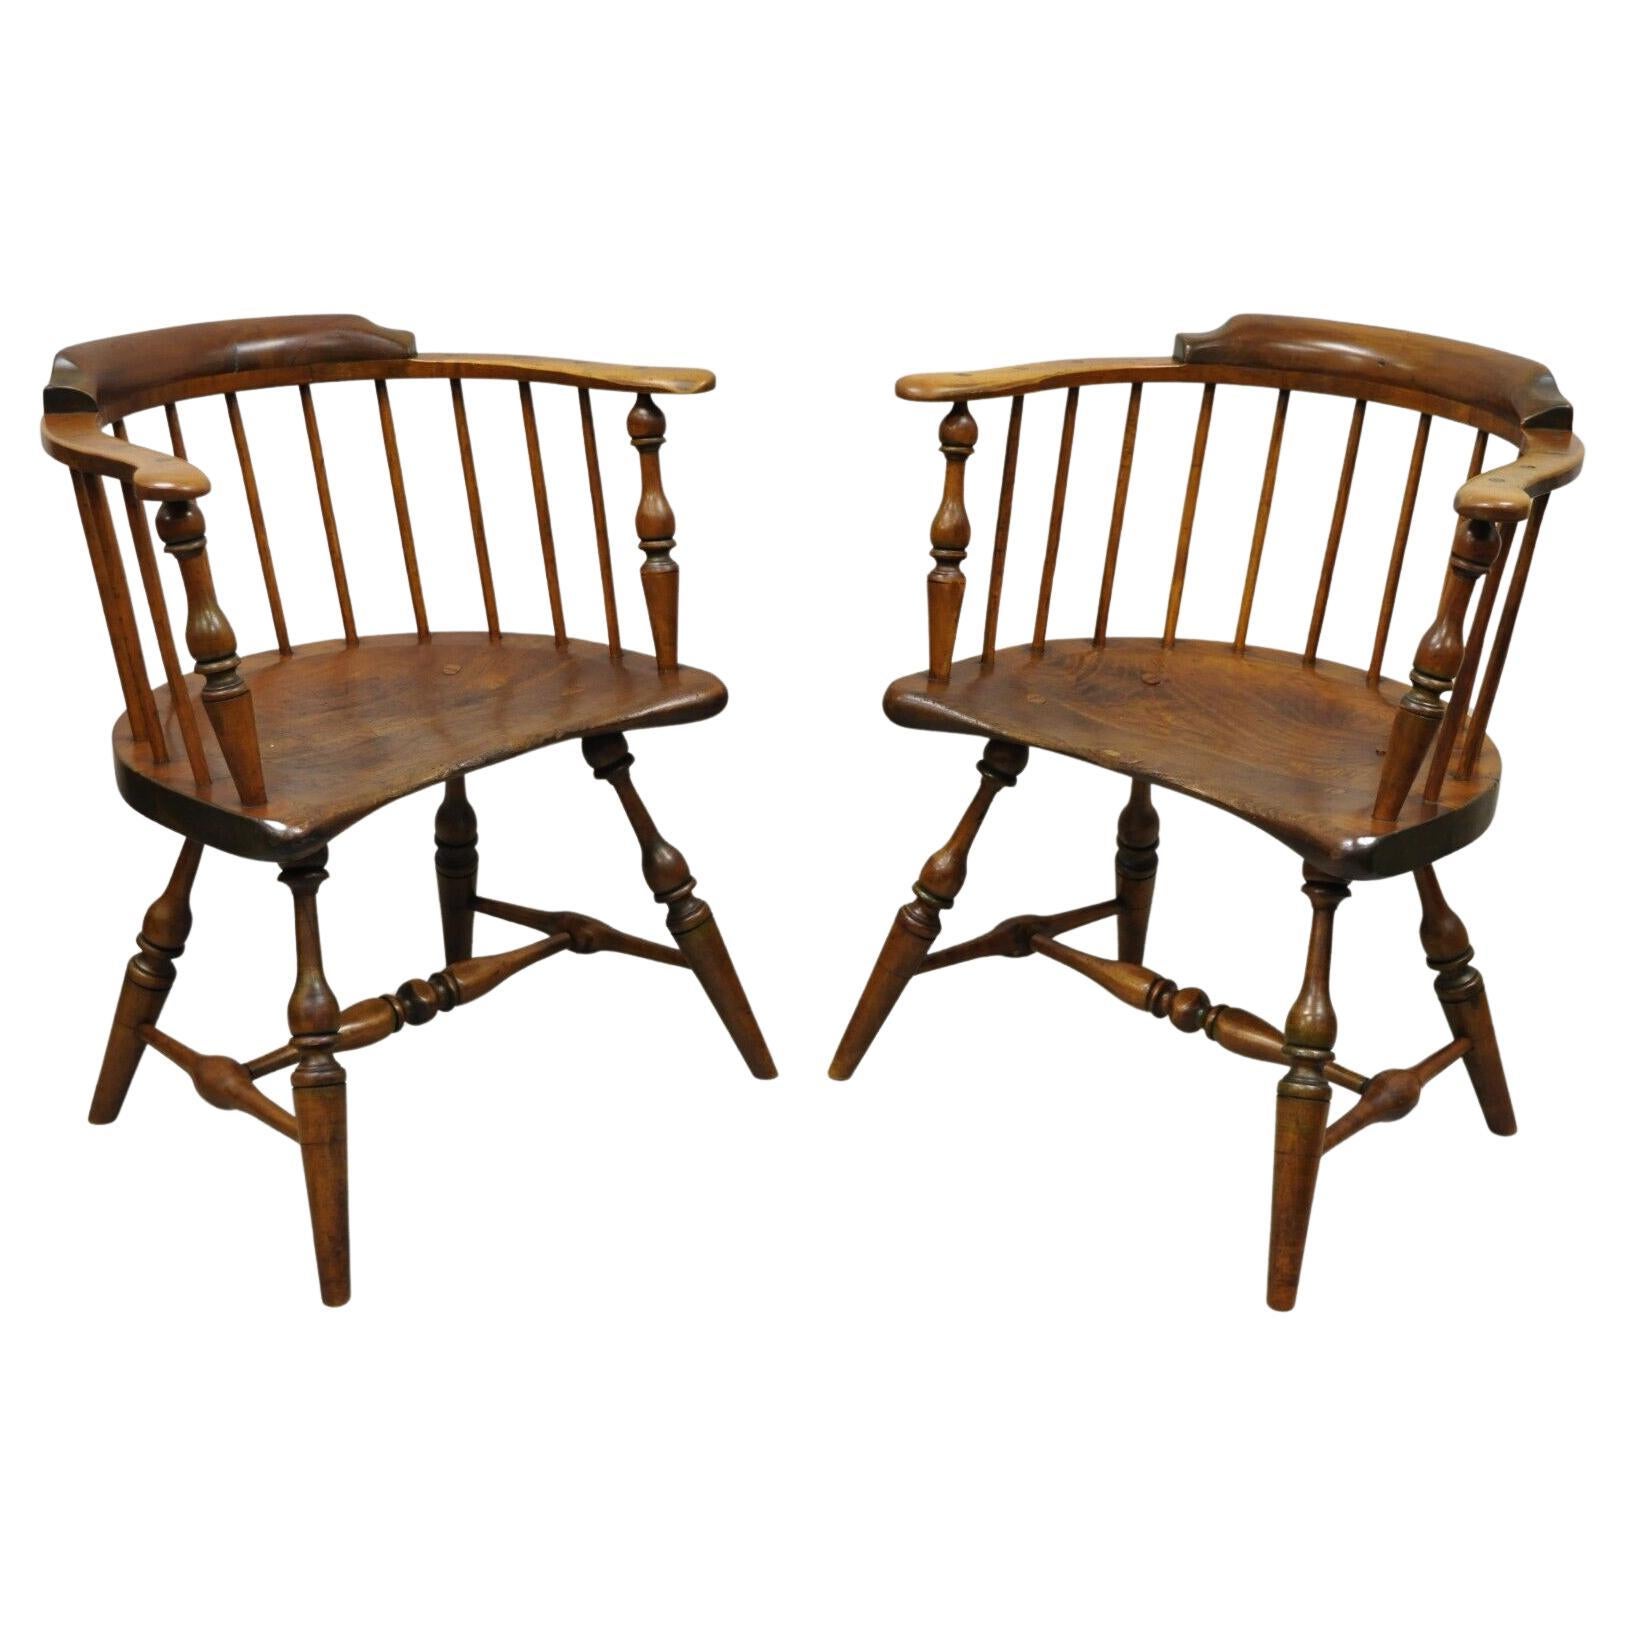 Antique Windsor Colonial Style Pine Wood Spindle Pub Arm Chairs, Pair For Sale